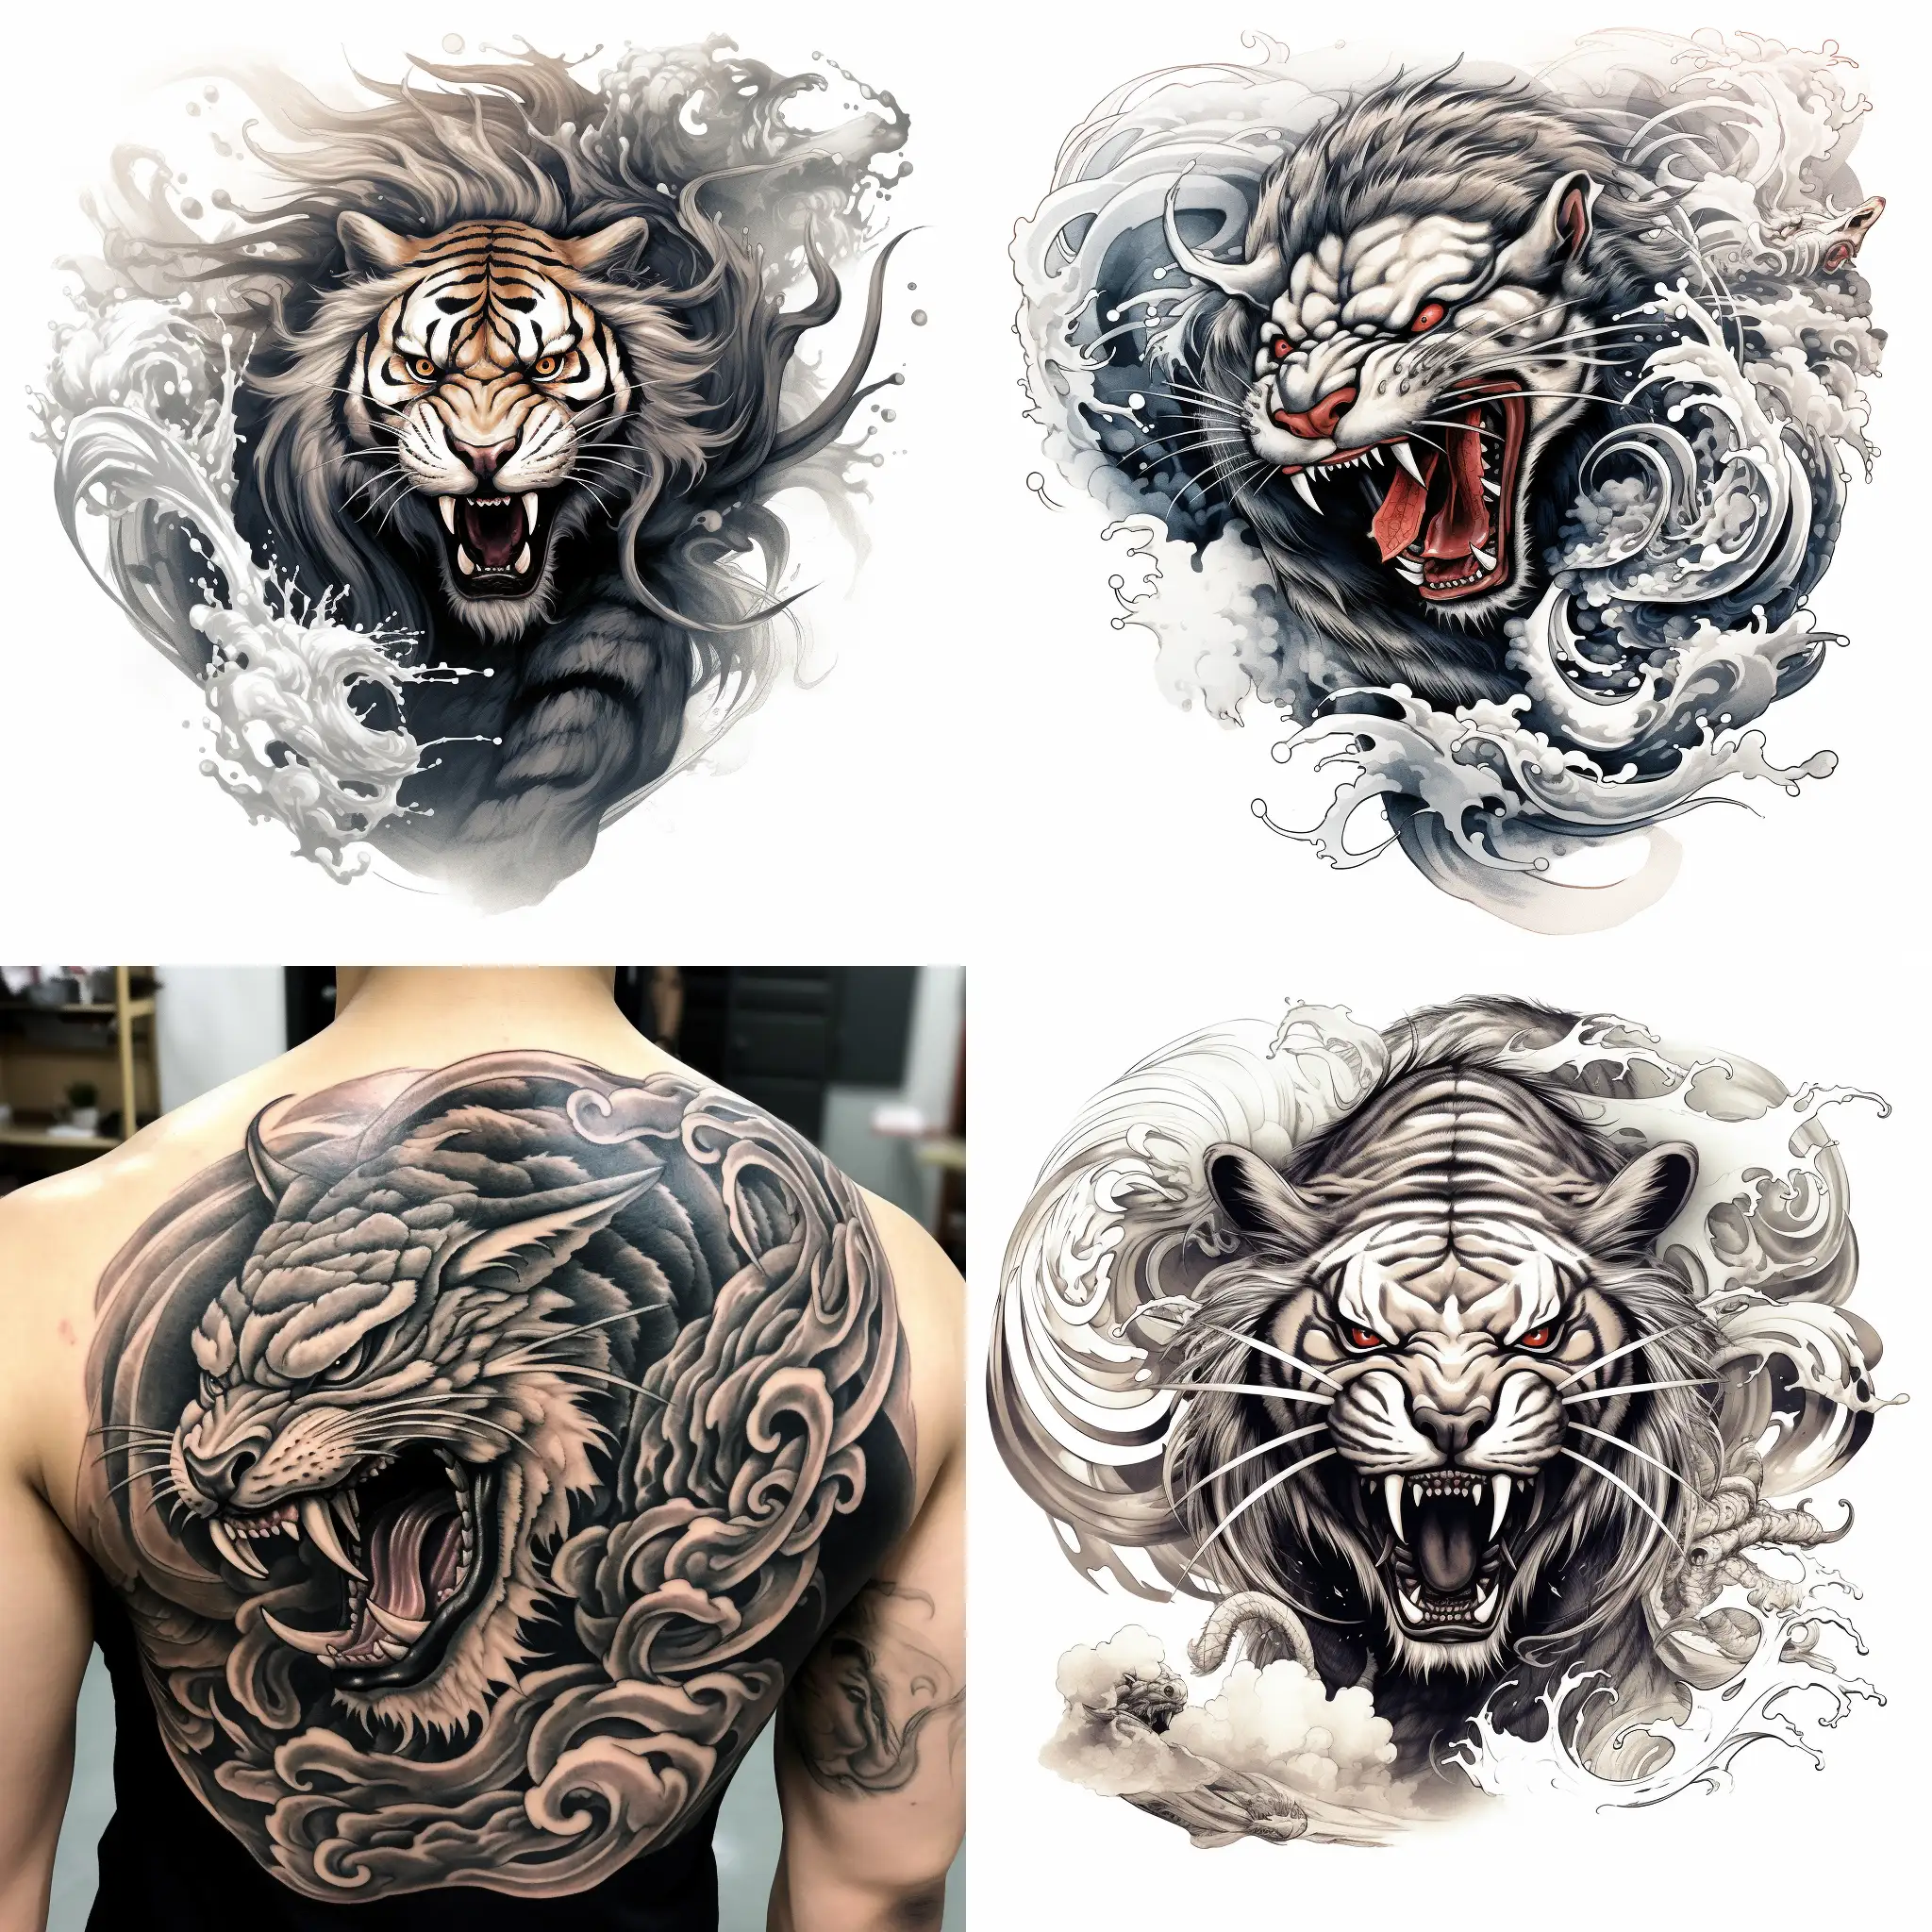 Fierce-Roaring-Tiger-Tattoo-Entwined-in-Mythical-Chinese-Dragon